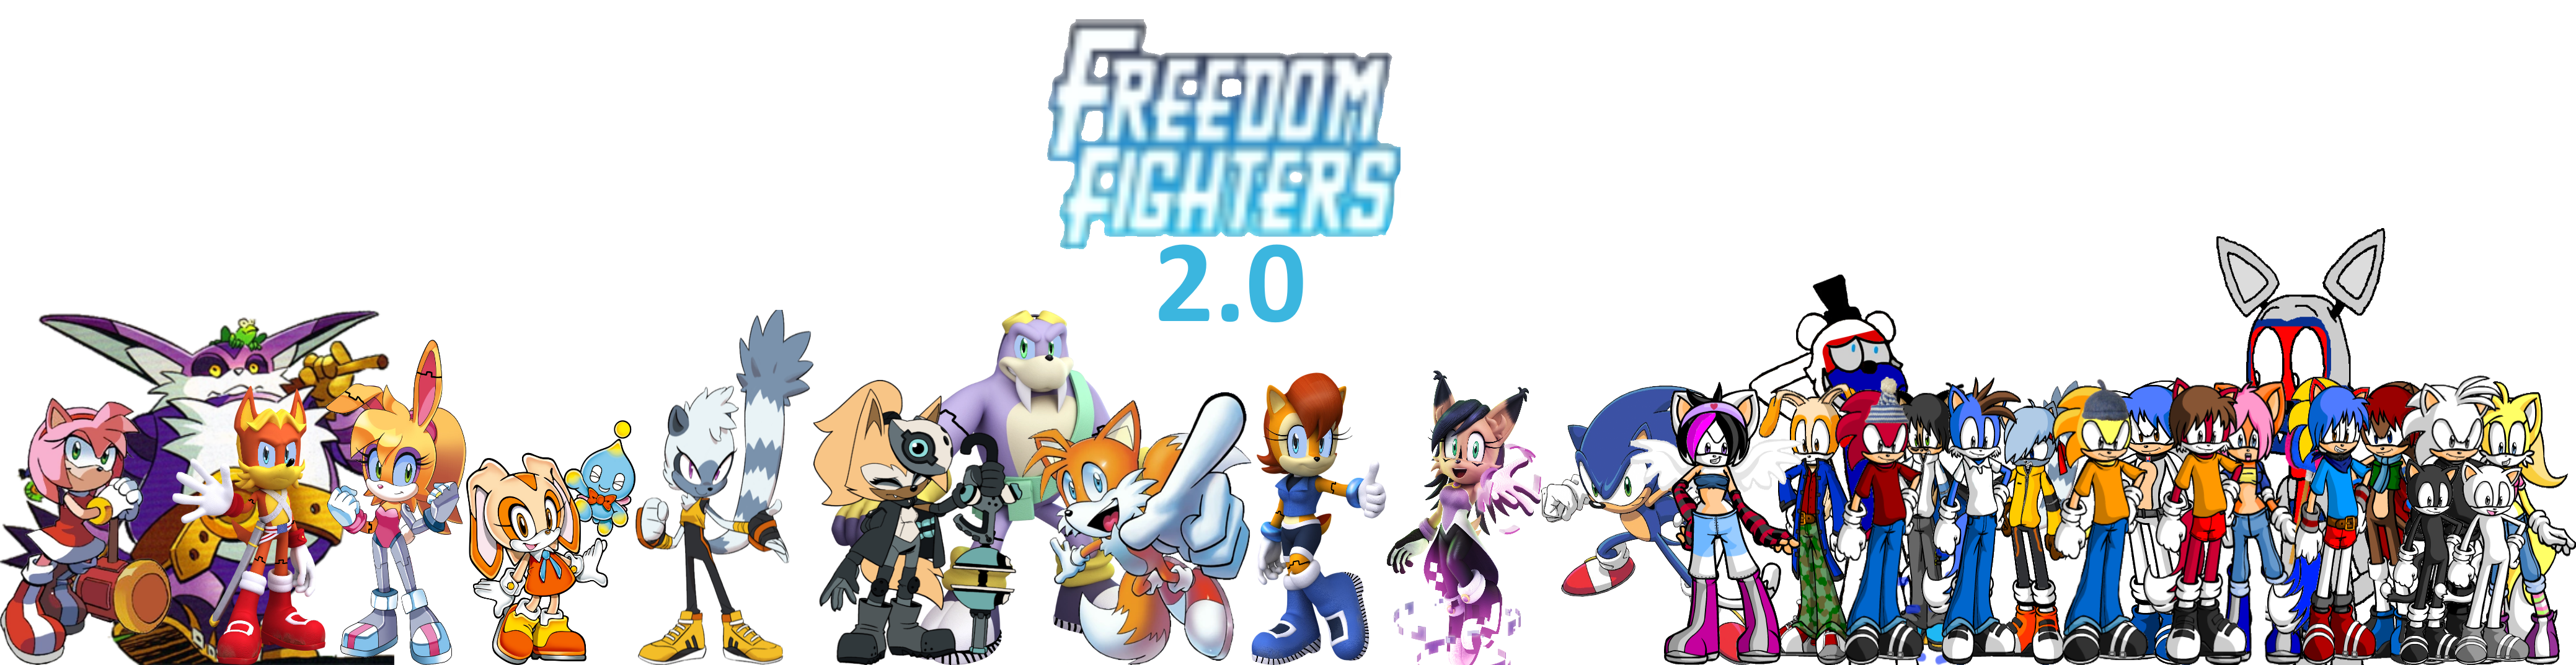 Team Freedom Fighters 2.0, Sonic Fanon Wiki